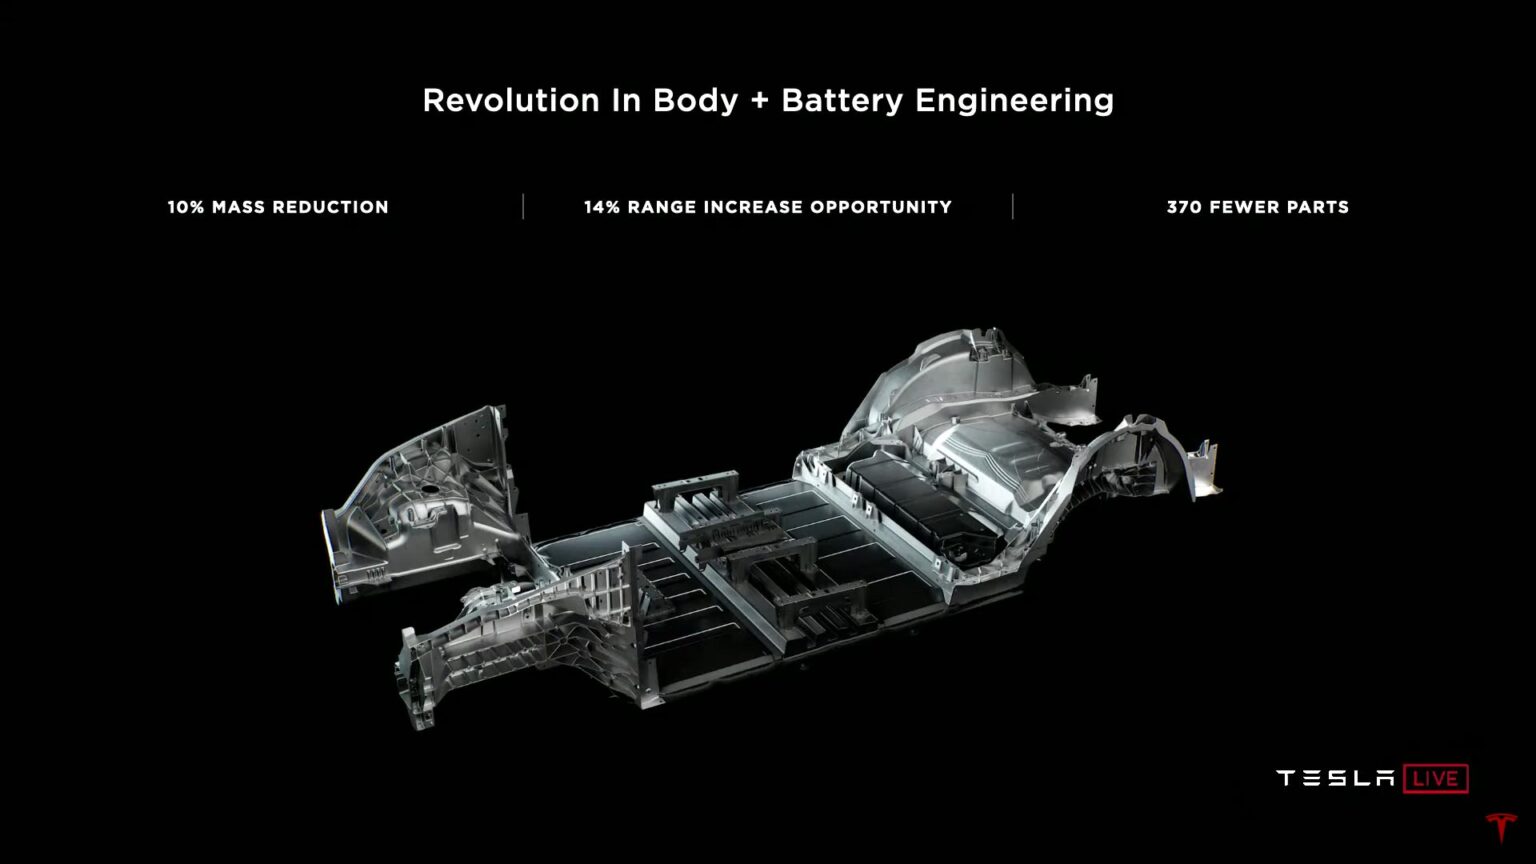 Tesla Model Y Giga Casting and Structural Battery Innovations (Battery